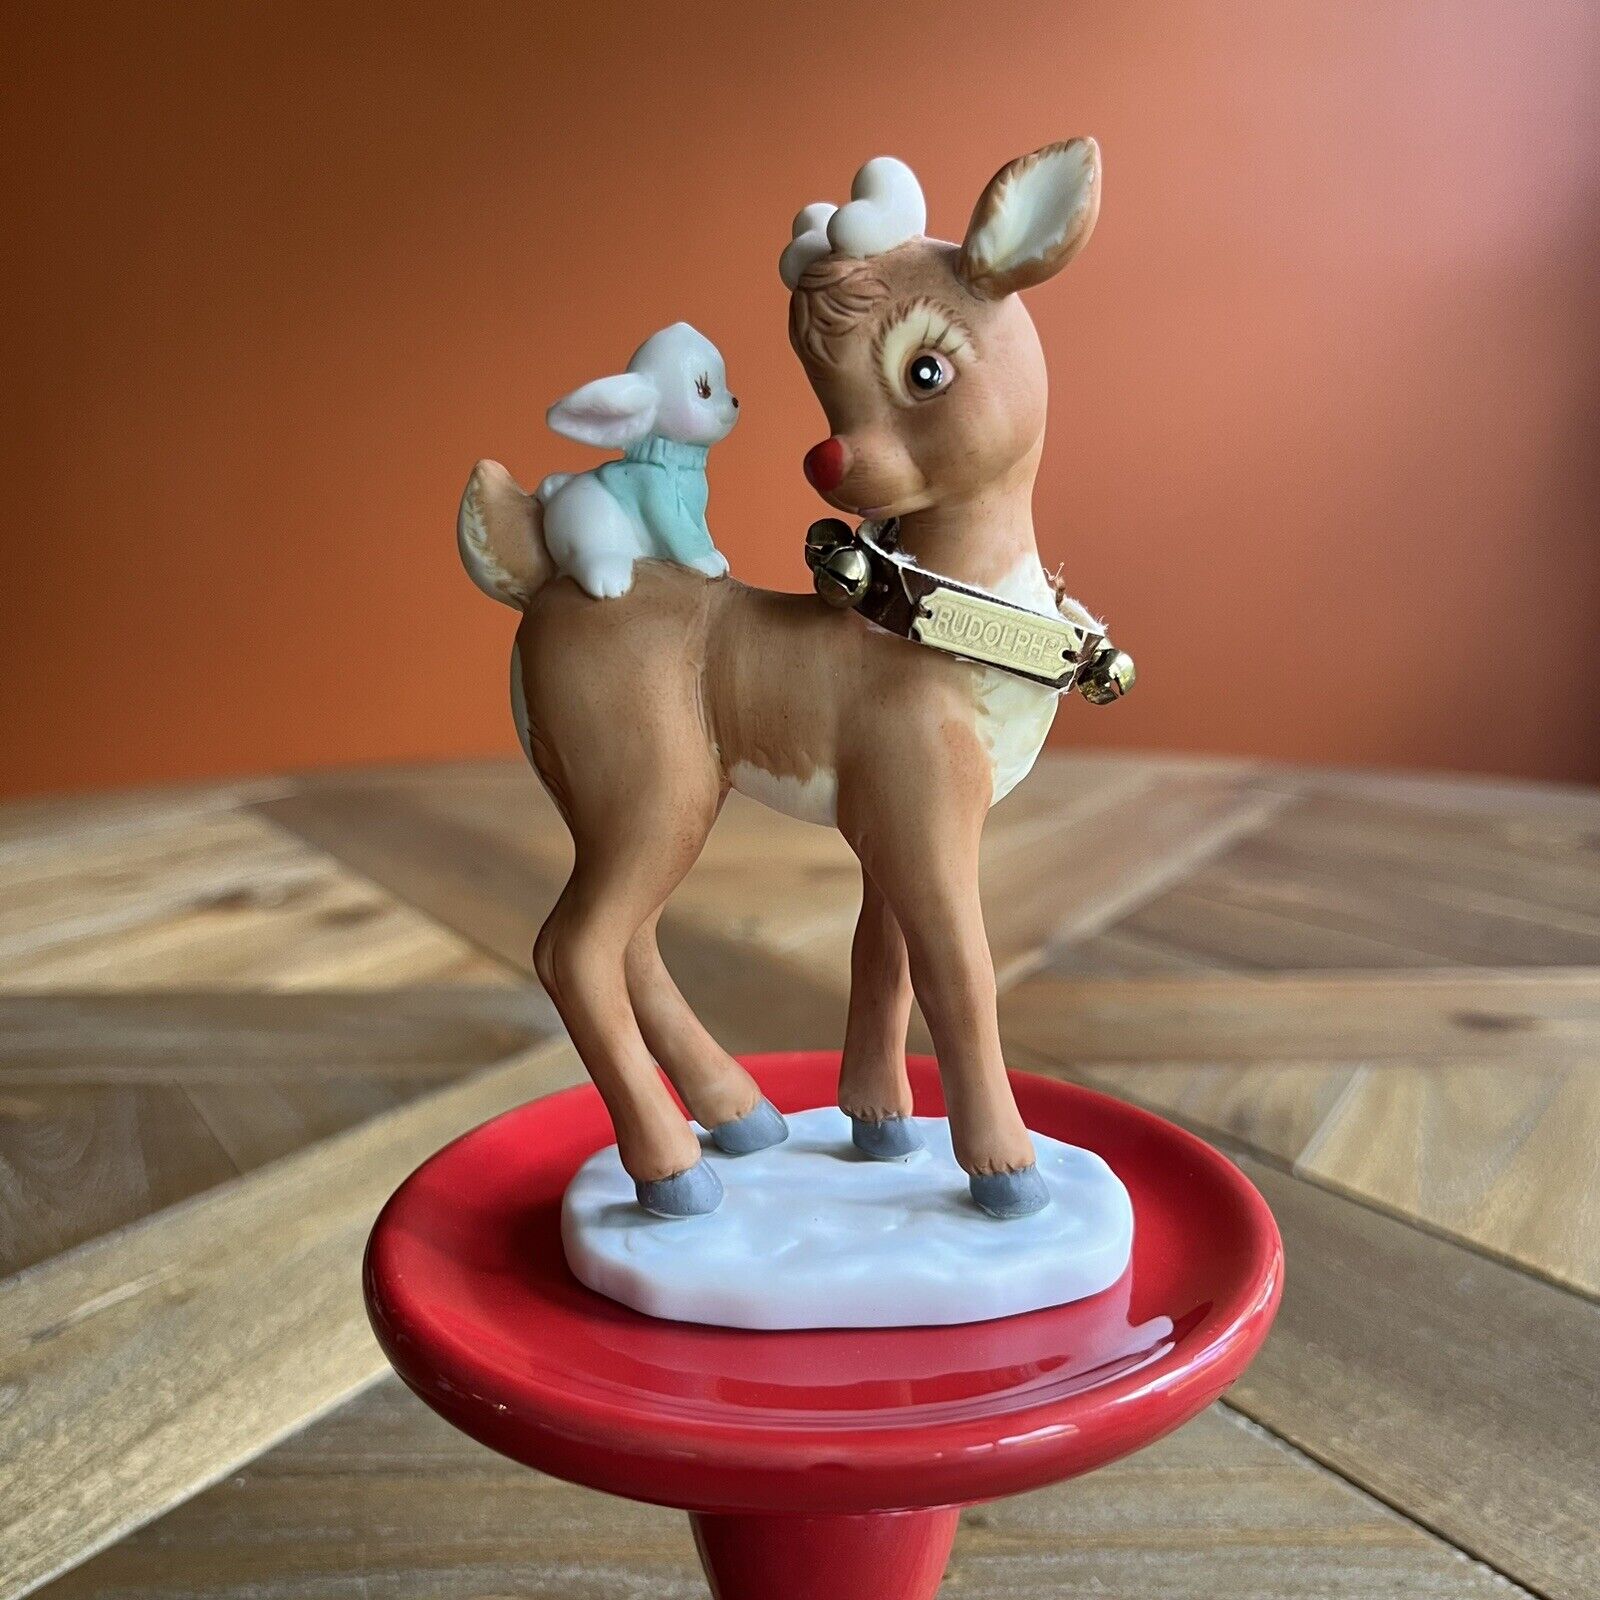 Vintage “Rudolph The Red Nosed Reindeer” Figurine Leather Collar Bells Bunny